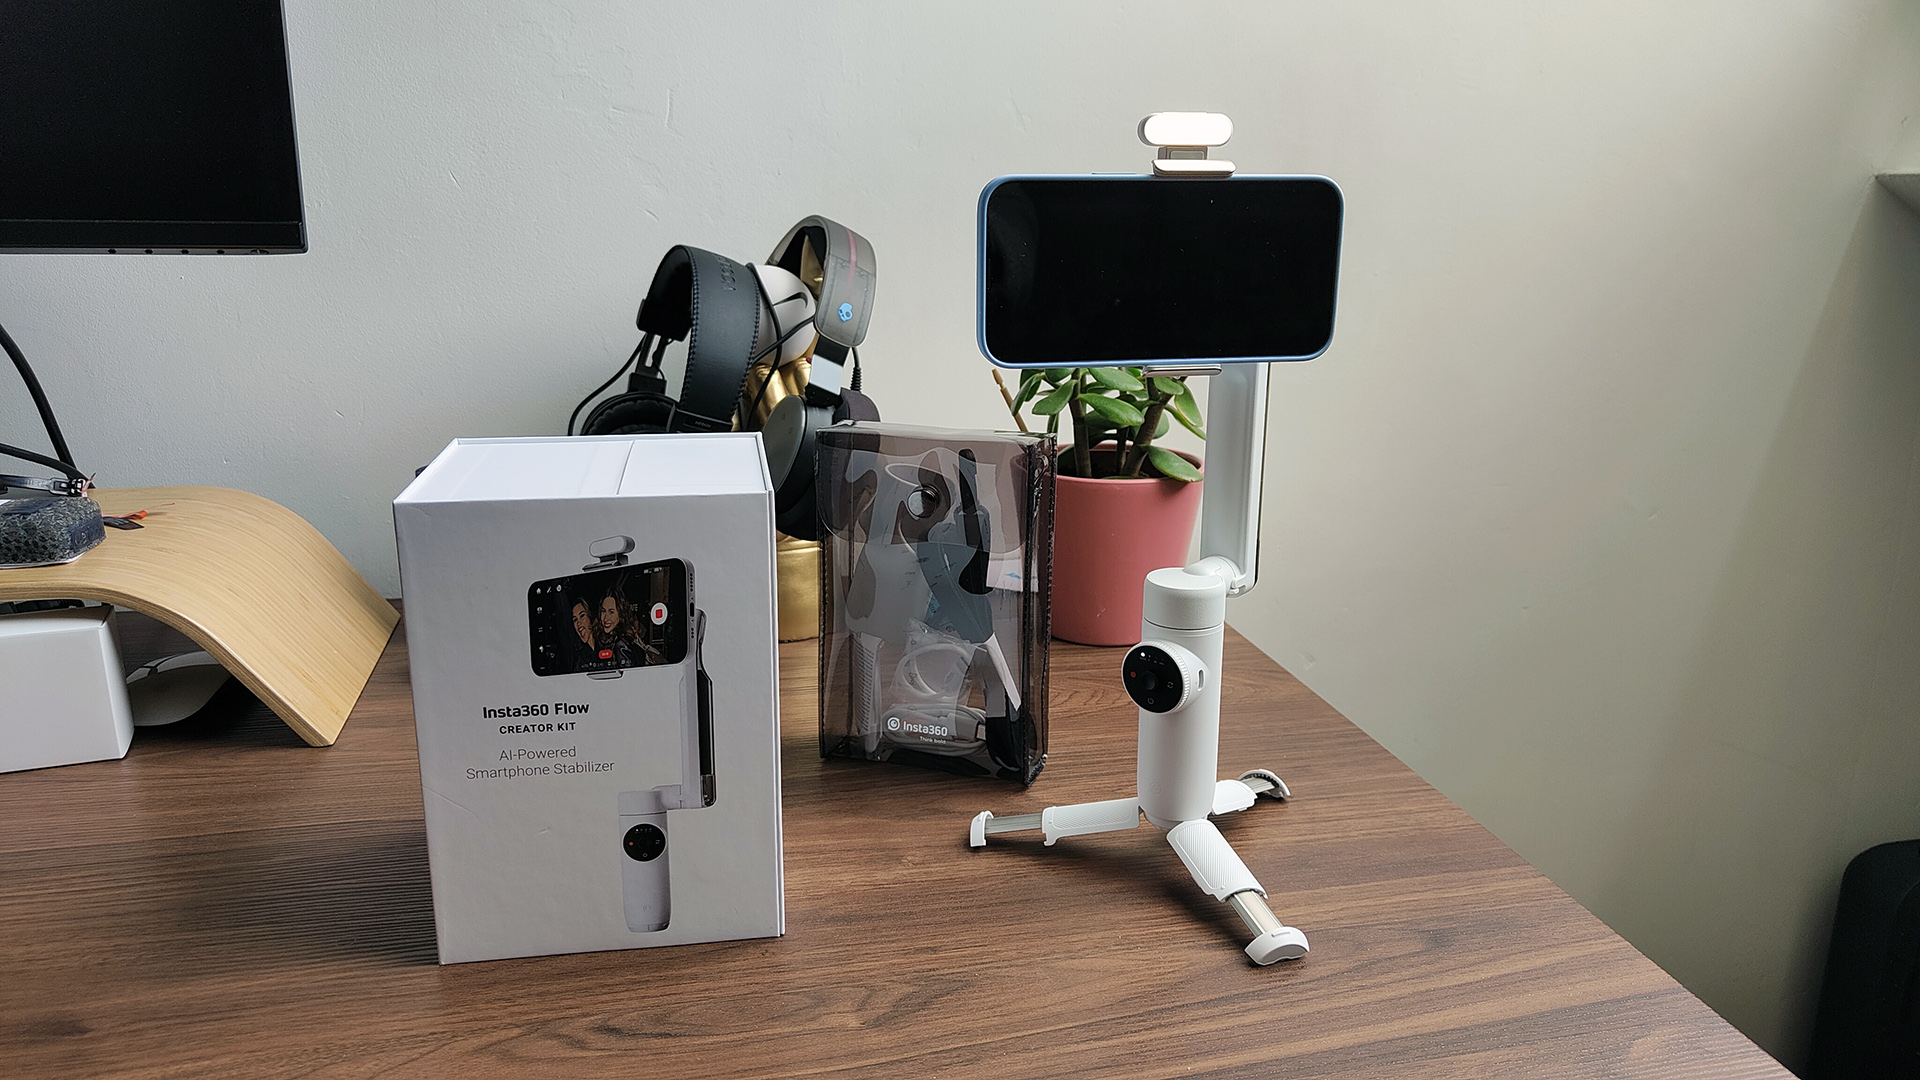 the blew… new it Flow and tried Insta360 I AI gimbal,